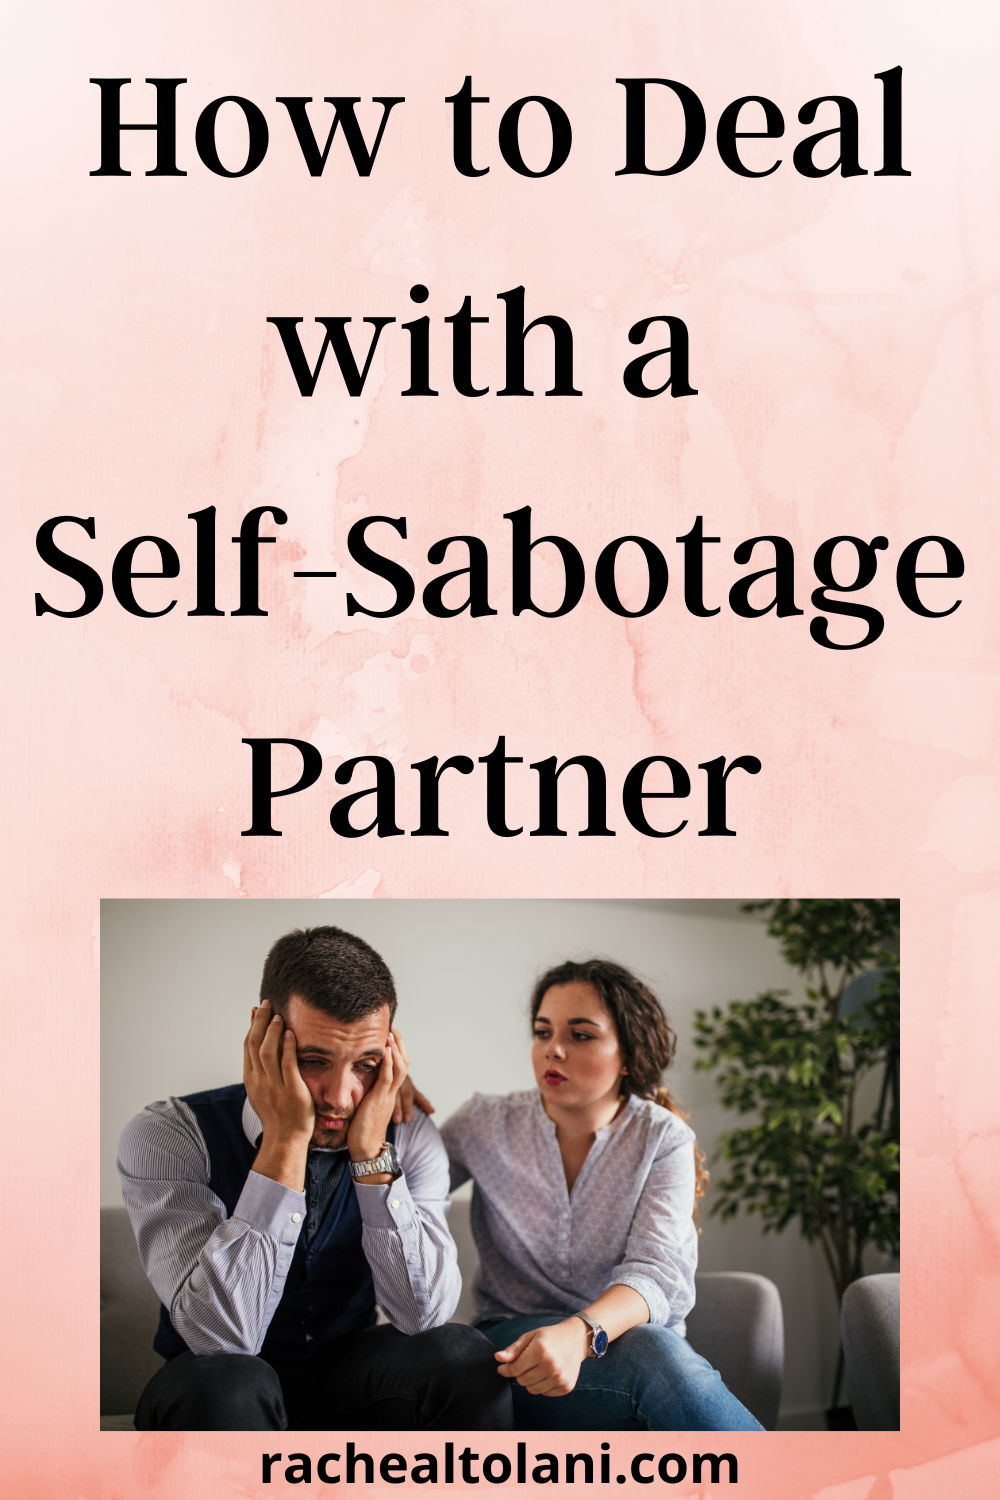 How to deal with self sabotage partner